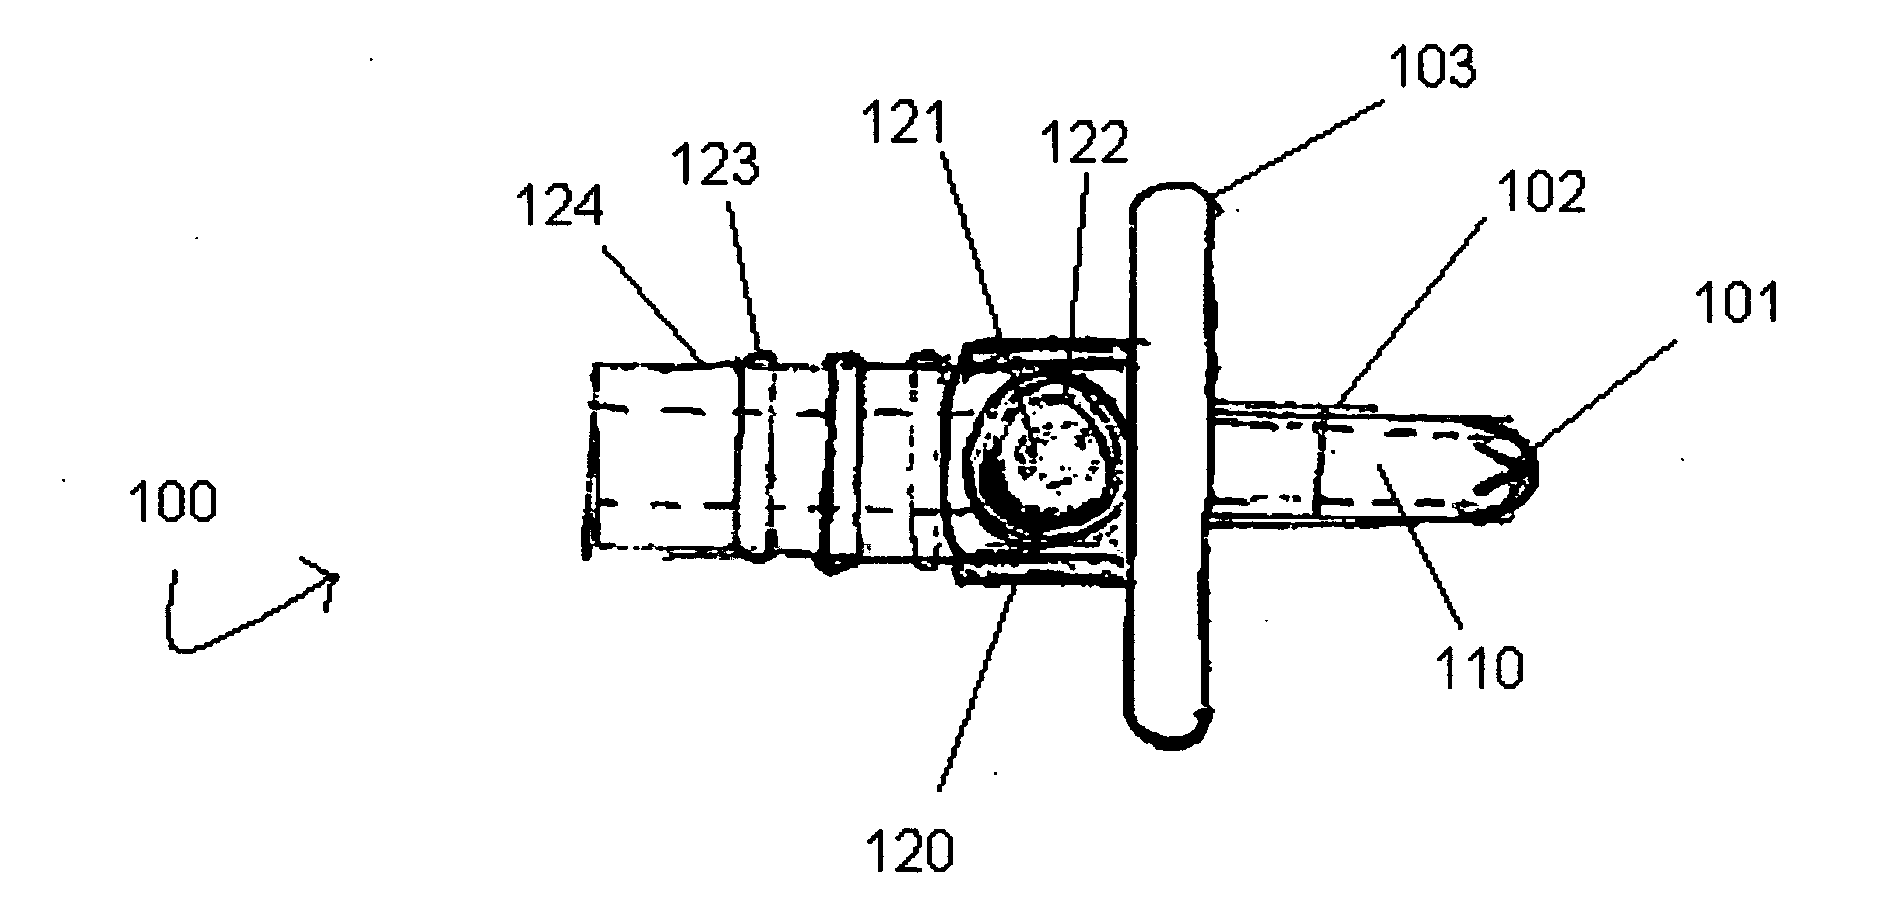 Devices and methods for securing catheter assemblies